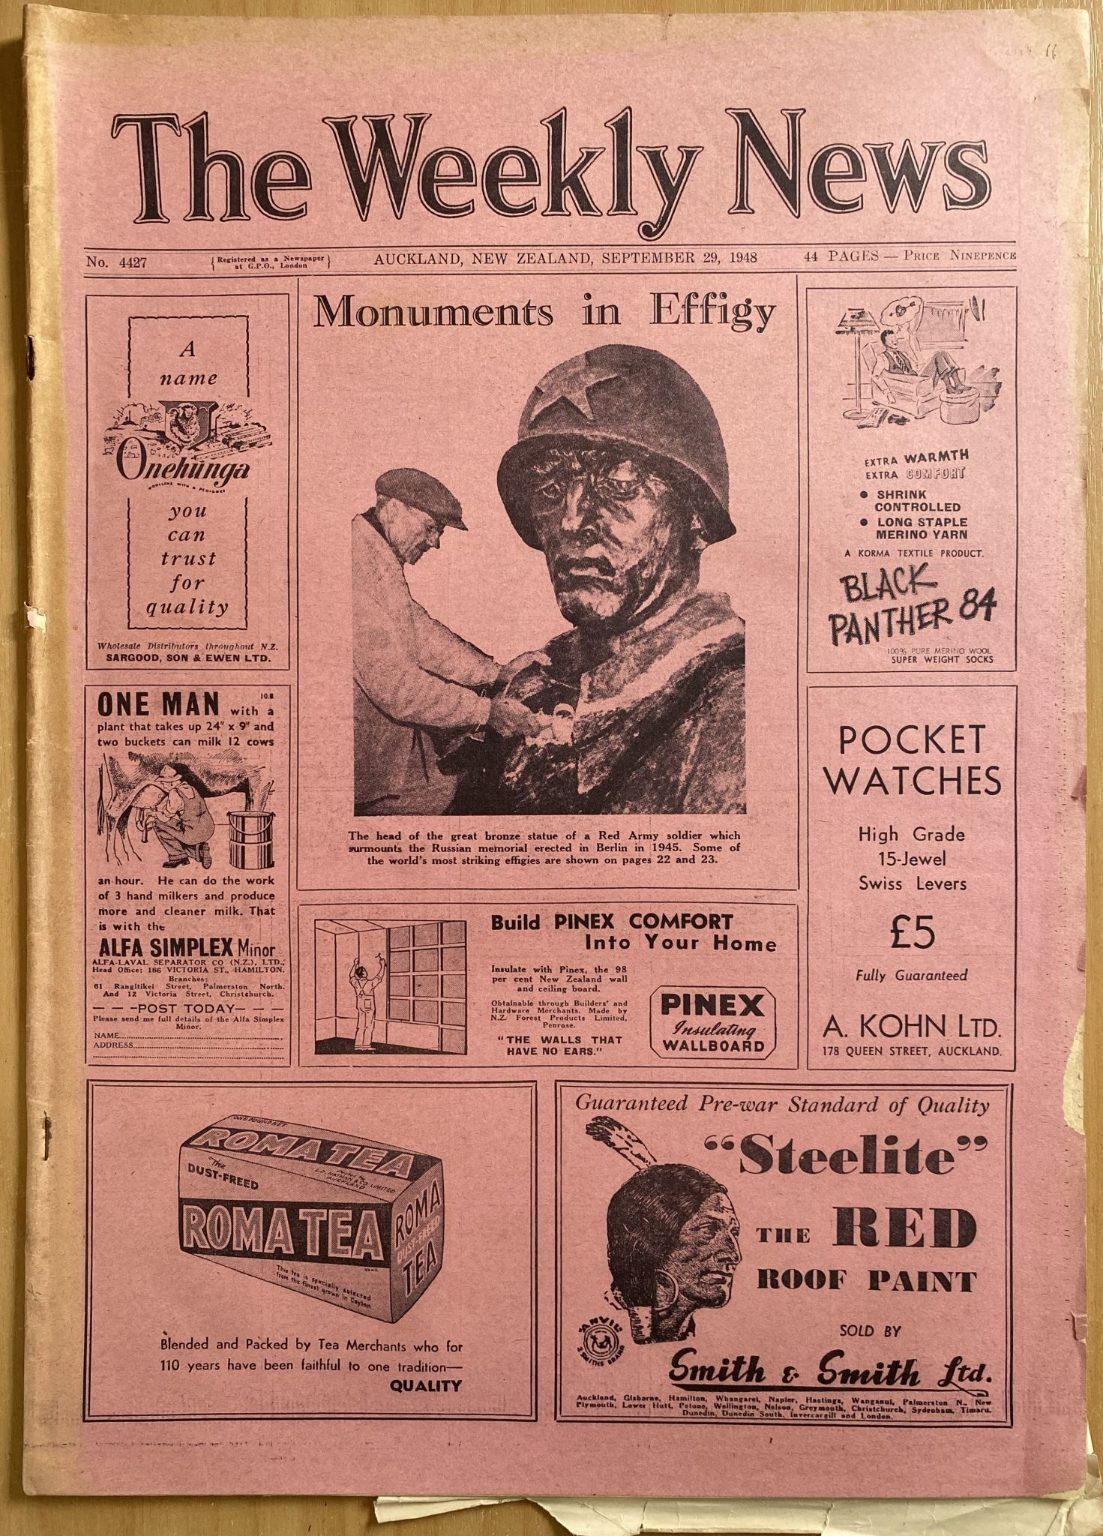 OLD NEWSPAPER: The Weekly News - No. 4427, 29 September 1948